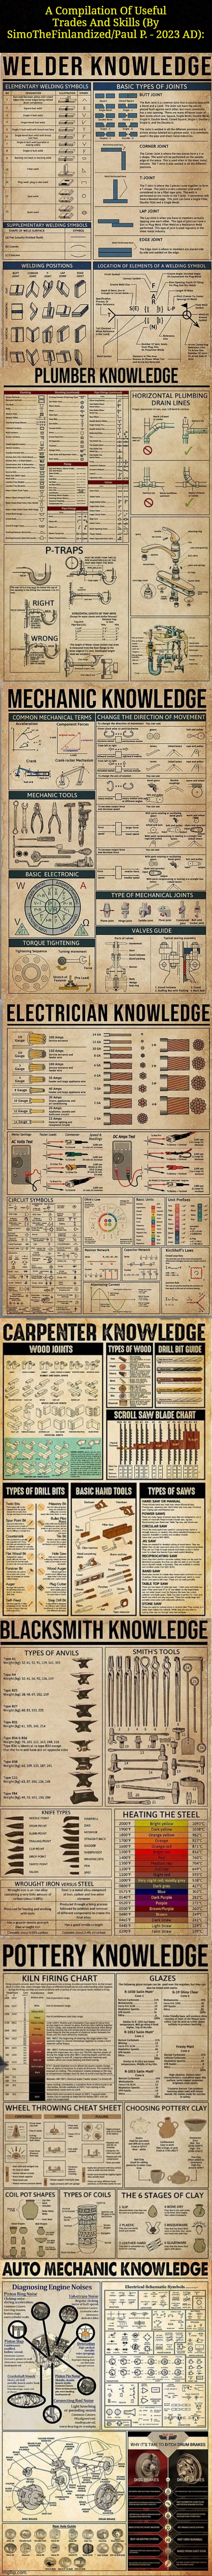 A Compilation Of Useful Trades And Skills (By SimoTheFinlandized/Paul P. - 2023 AD): | A Compilation Of Useful Trades And Skills (By SimoTheFinlandized/Paul P. - 2023 AD): | image tagged in simothefinlandized,trades,infographics,tutorial | made w/ Imgflip meme maker